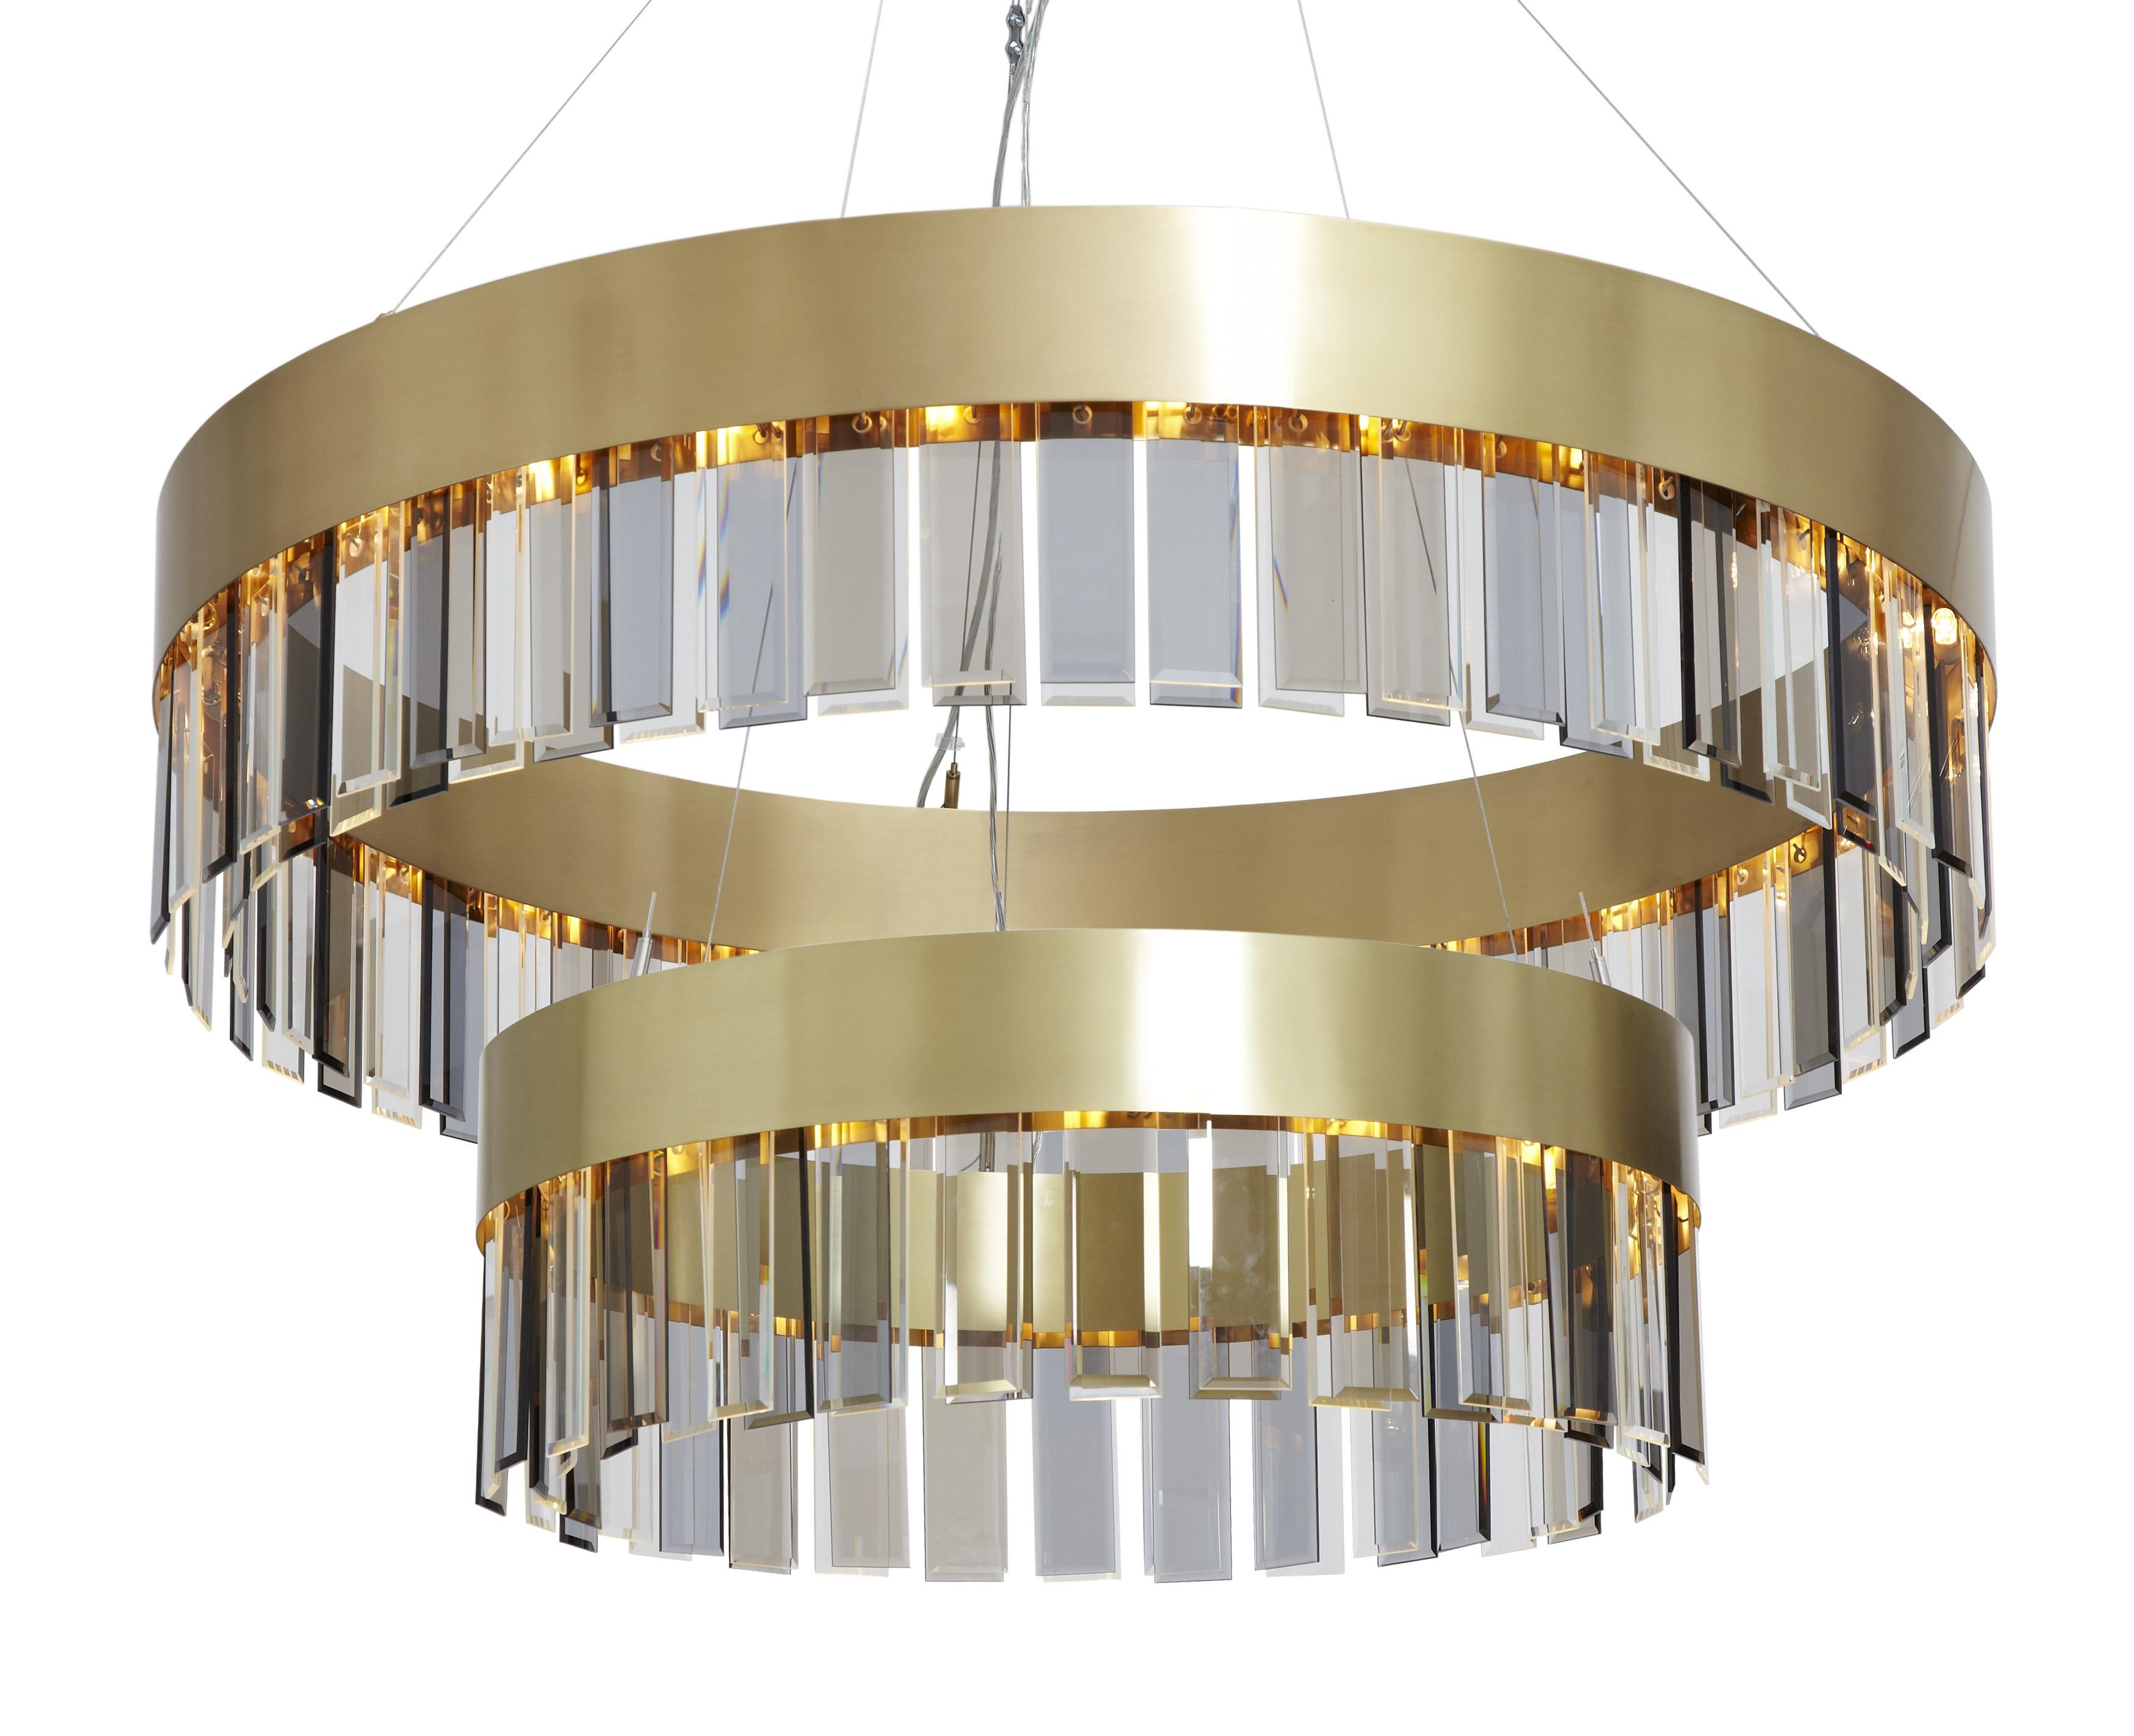 Solaris twin pendant by CTO Lighting
Materials: satin brass with cut glass drops and stainless steel suspension wire/clear flex
Dimensions: H 40 (min) x W 110 cm 

All our lamps can be wired according to each country. If sold to the USA it will be